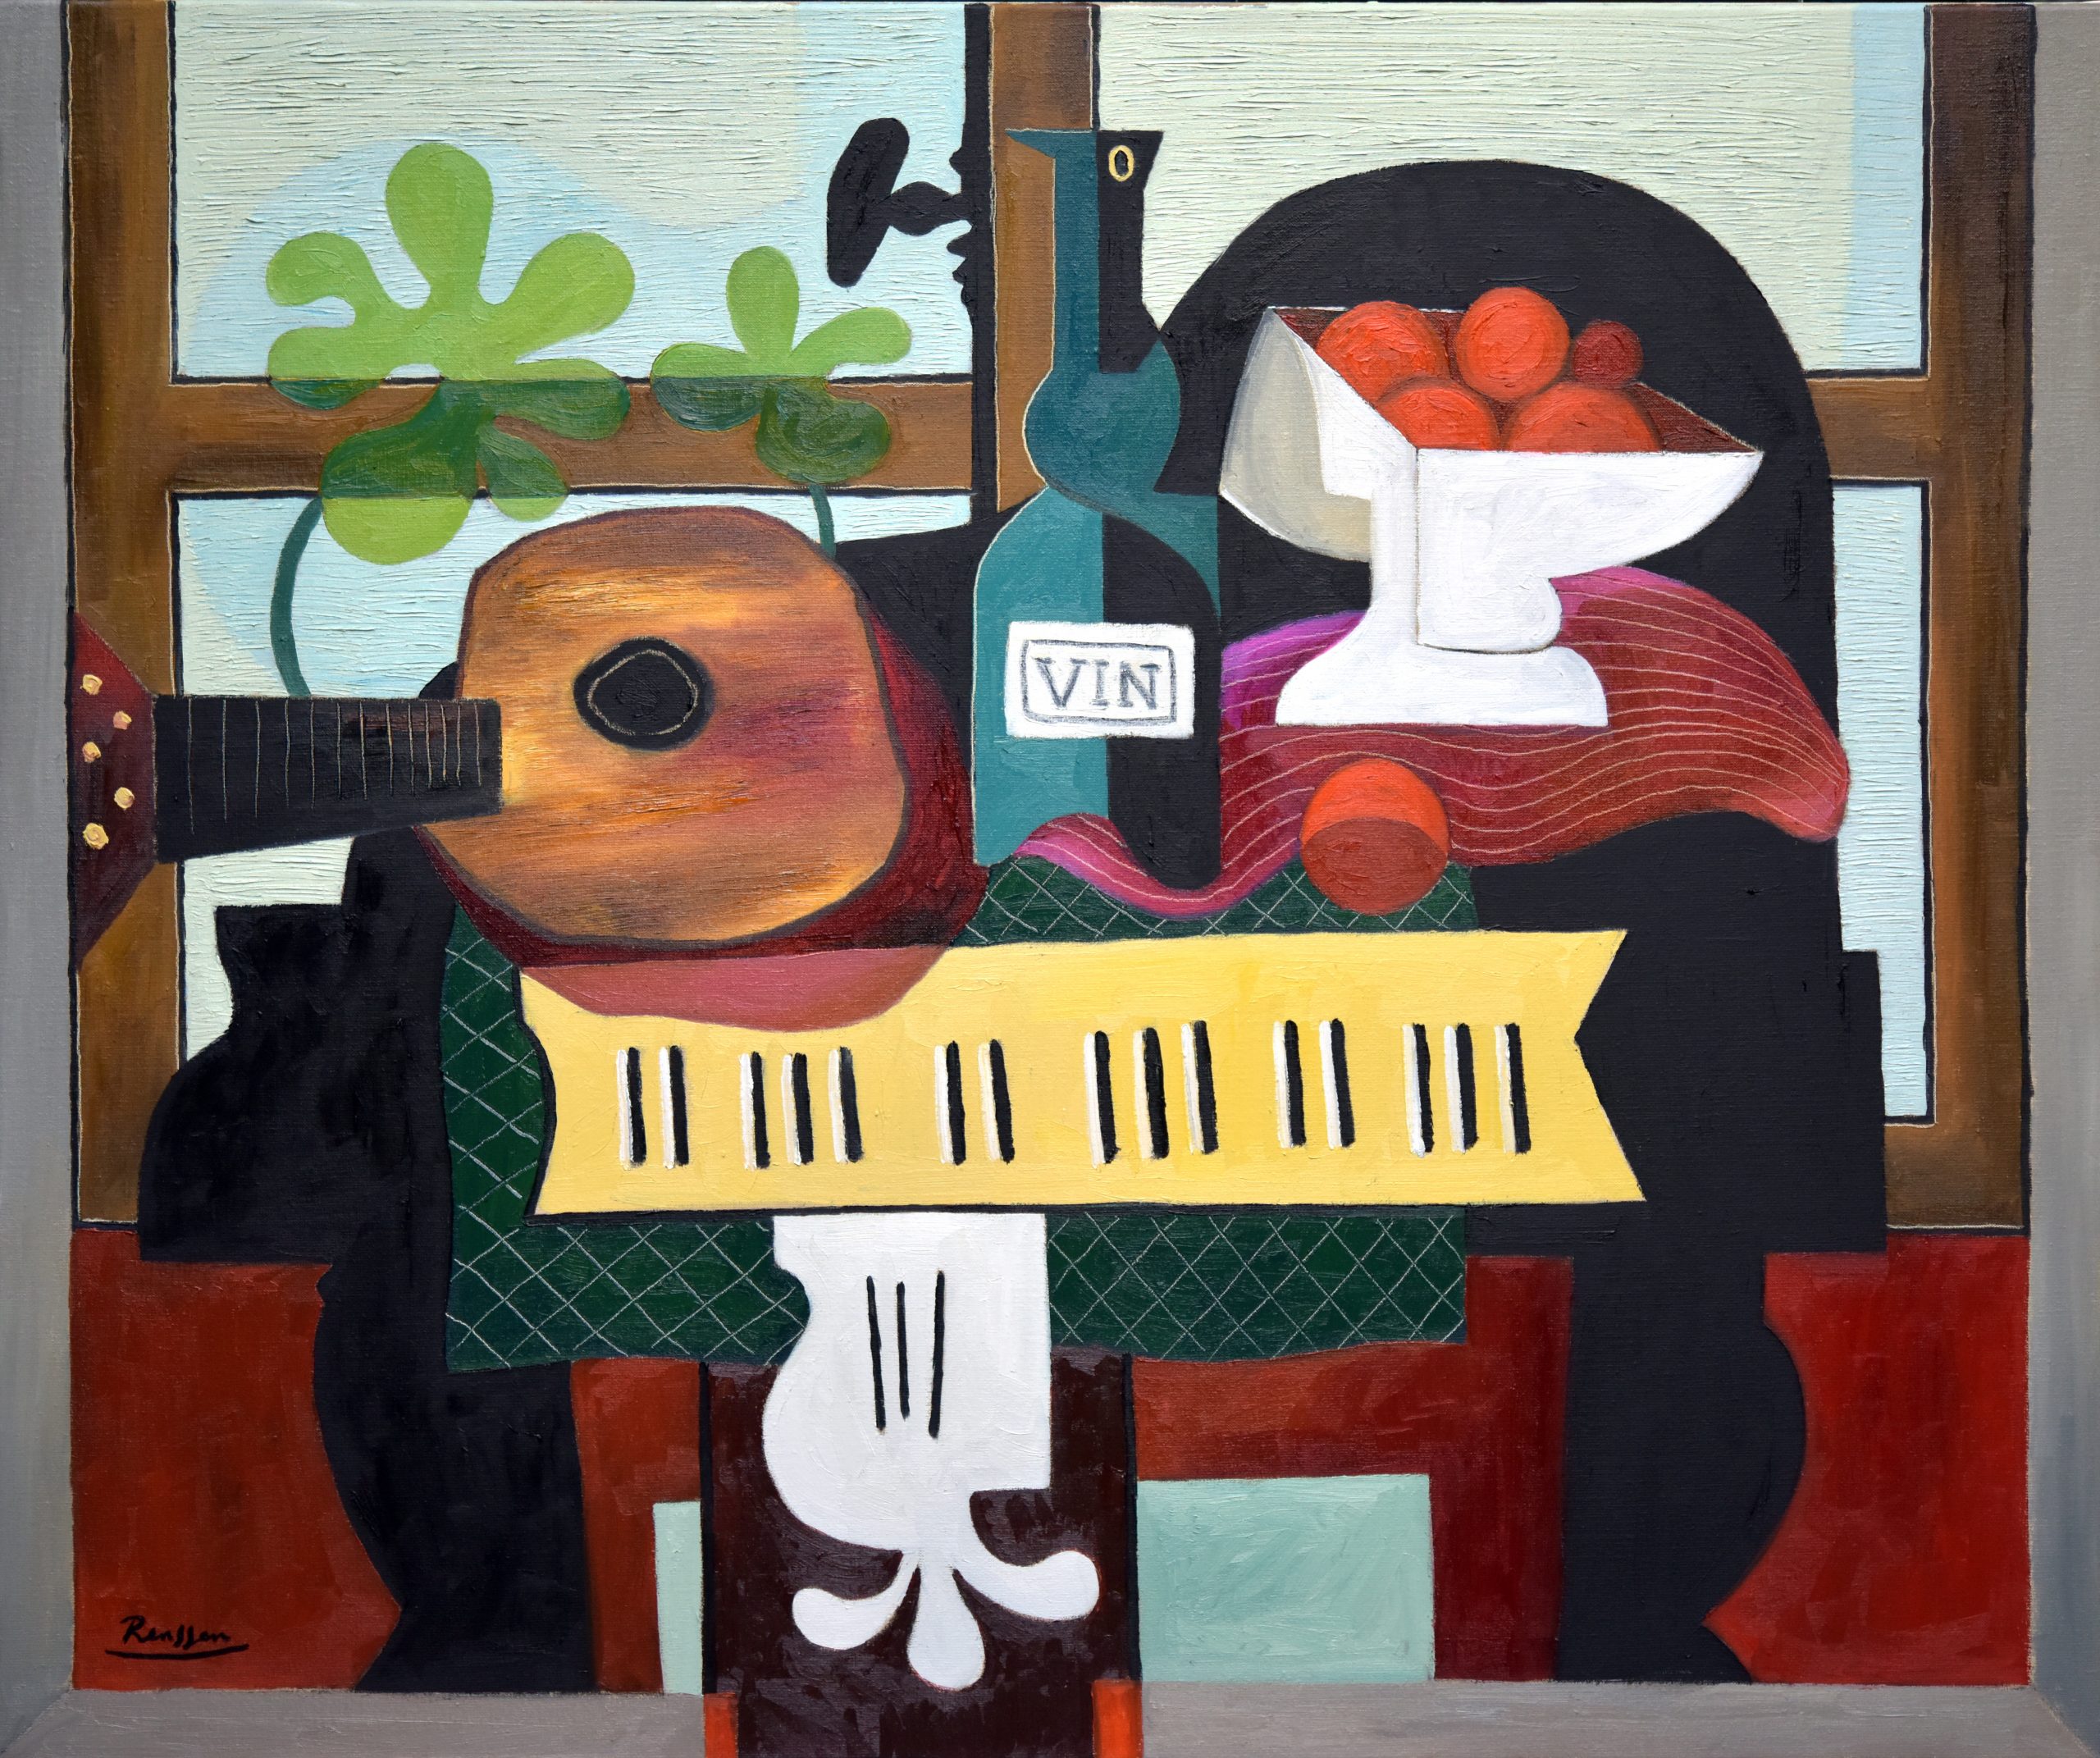 Guitar, Bottle And Oranges On A Piano | Edition Of 10